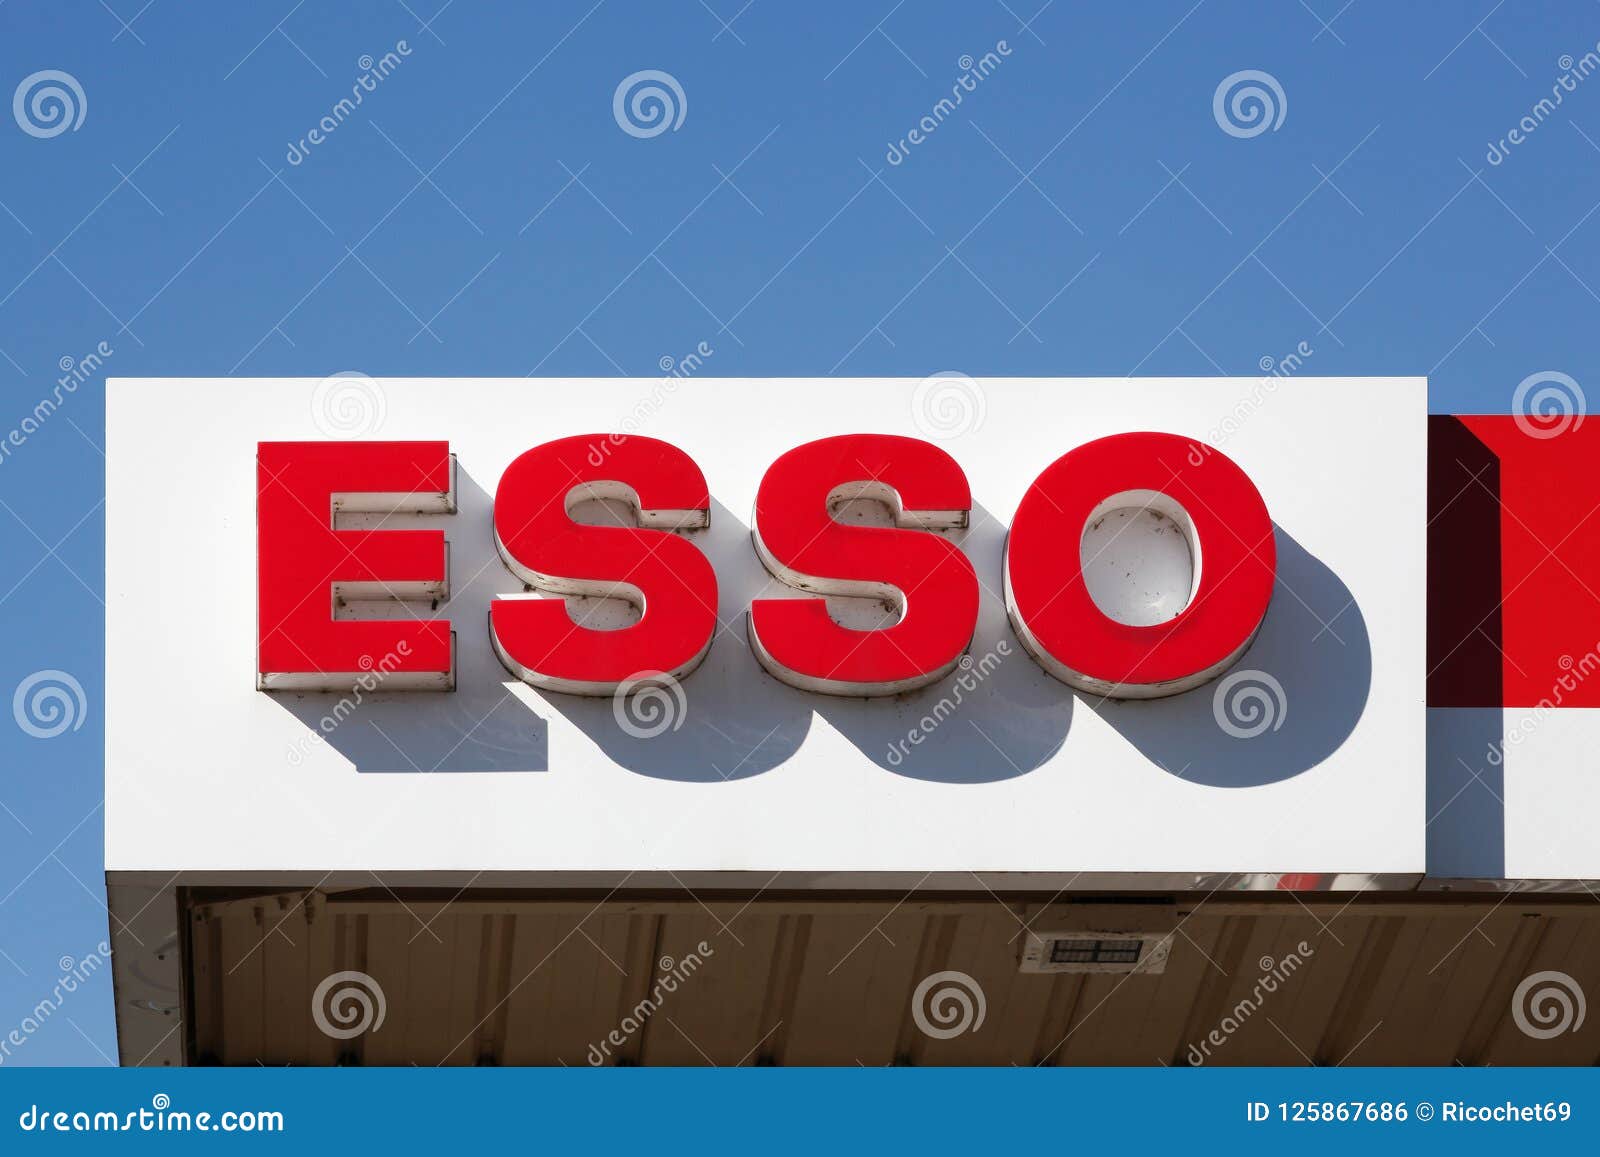 Esso Logo On A Gas Station Editorial Photo Image Of Corporate